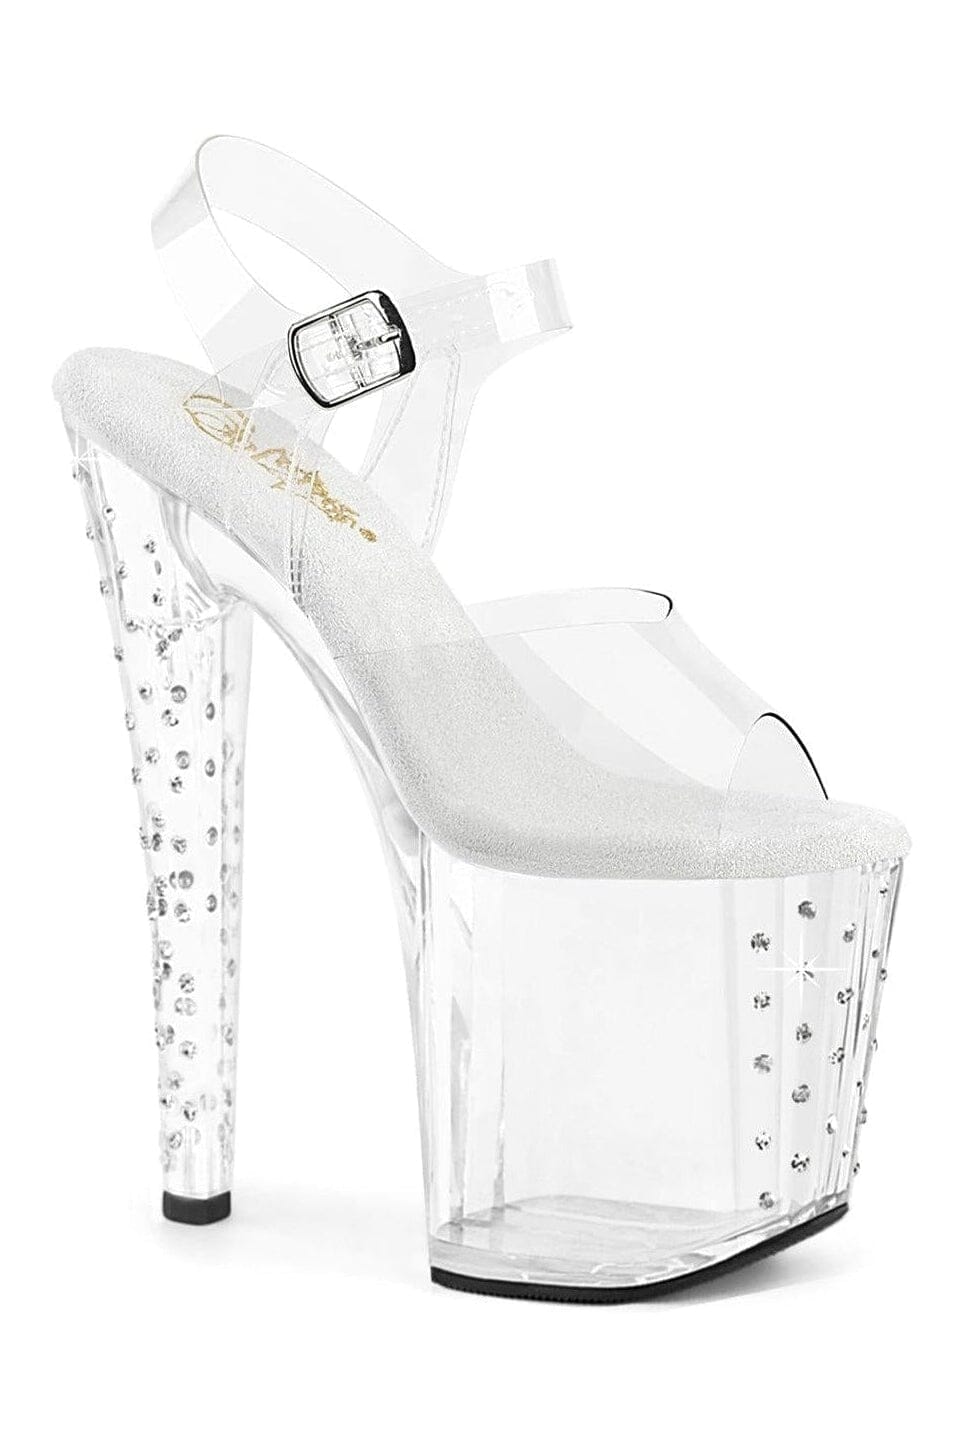 Pleaser Clear Sandals Platform Stripper Shoes | Buy at Sexyshoes.com